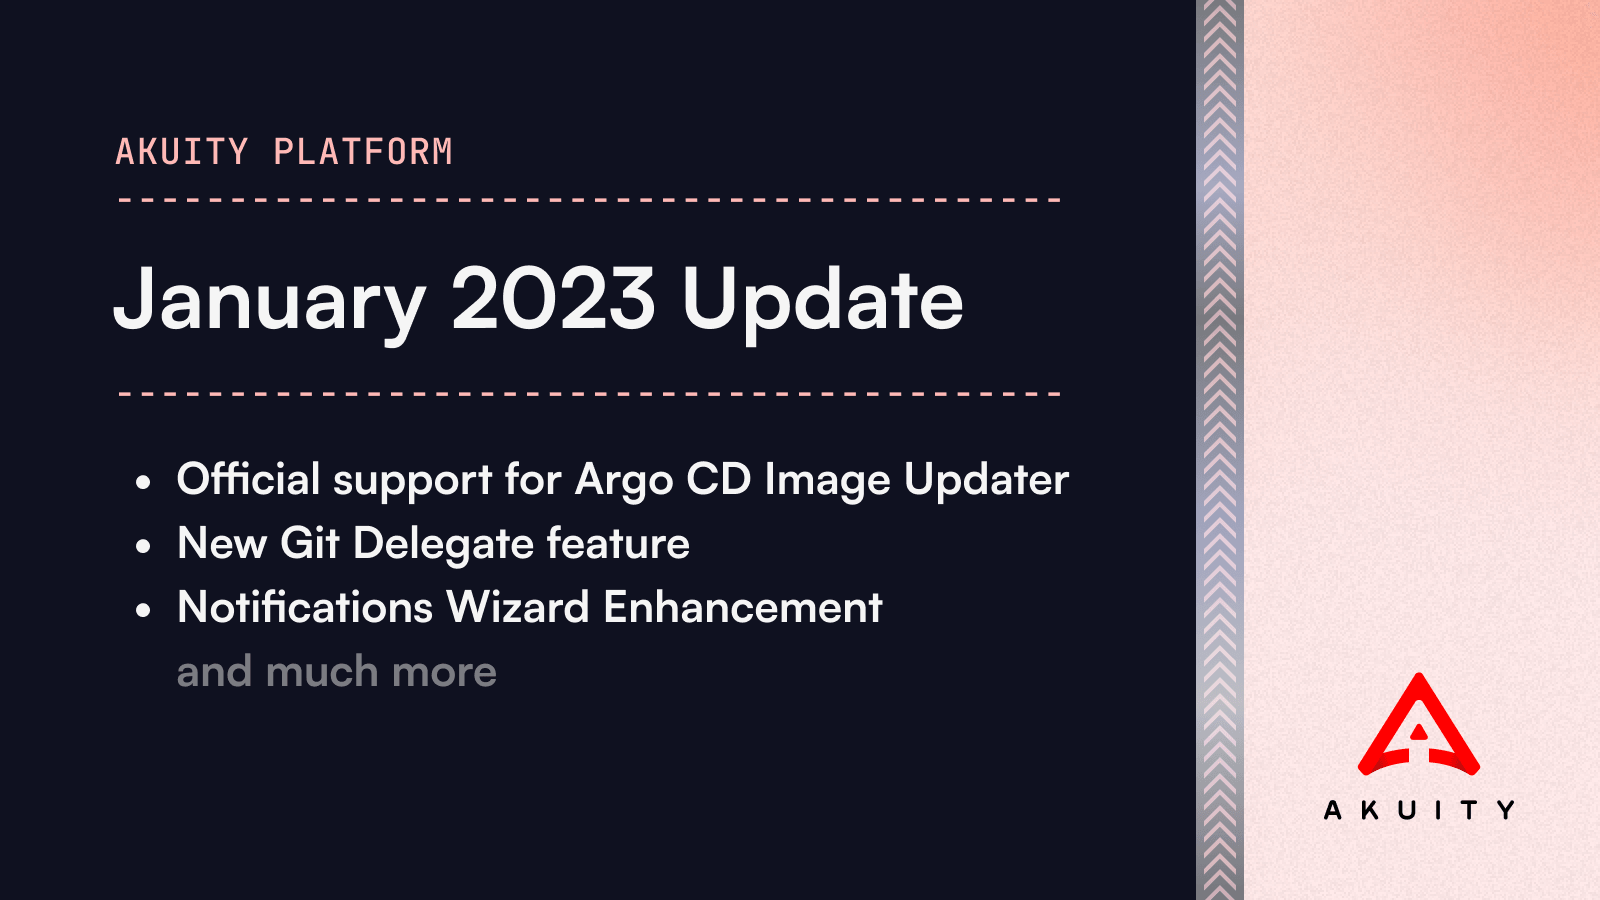 Akuity Platform January 2023 Update Cover Image